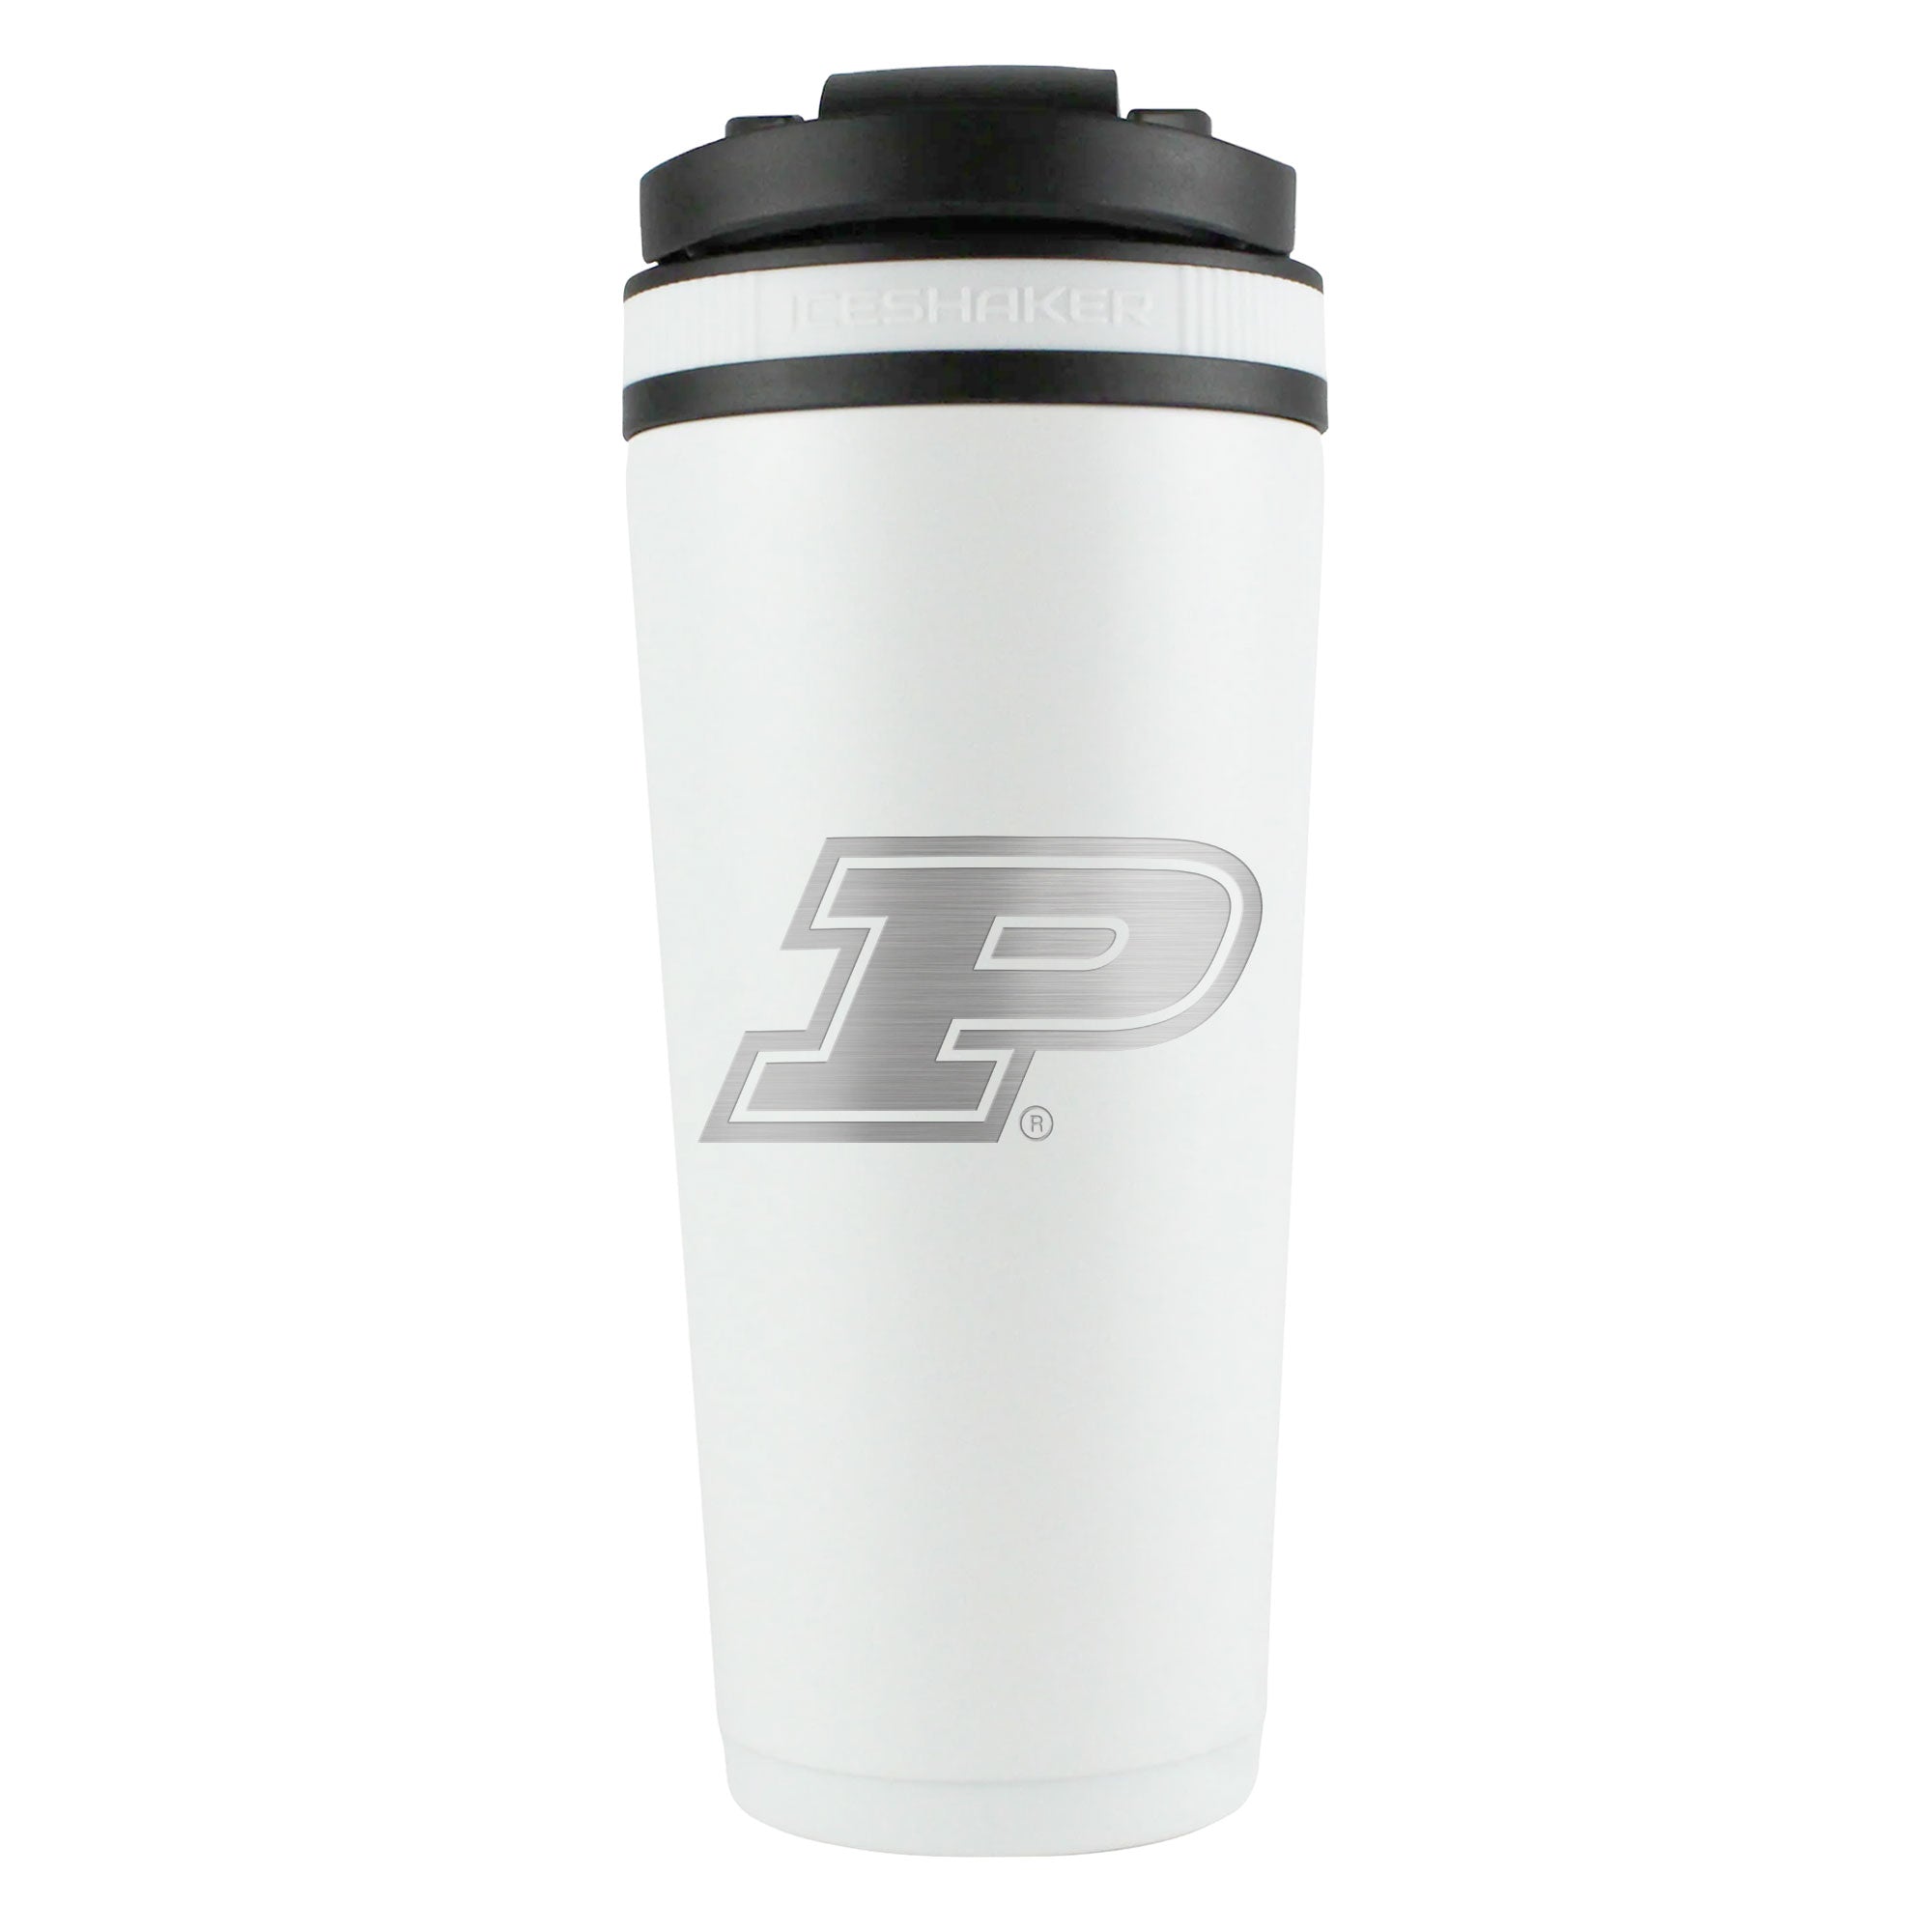 Officially Licensed Purdue University 26oz Ice Shaker